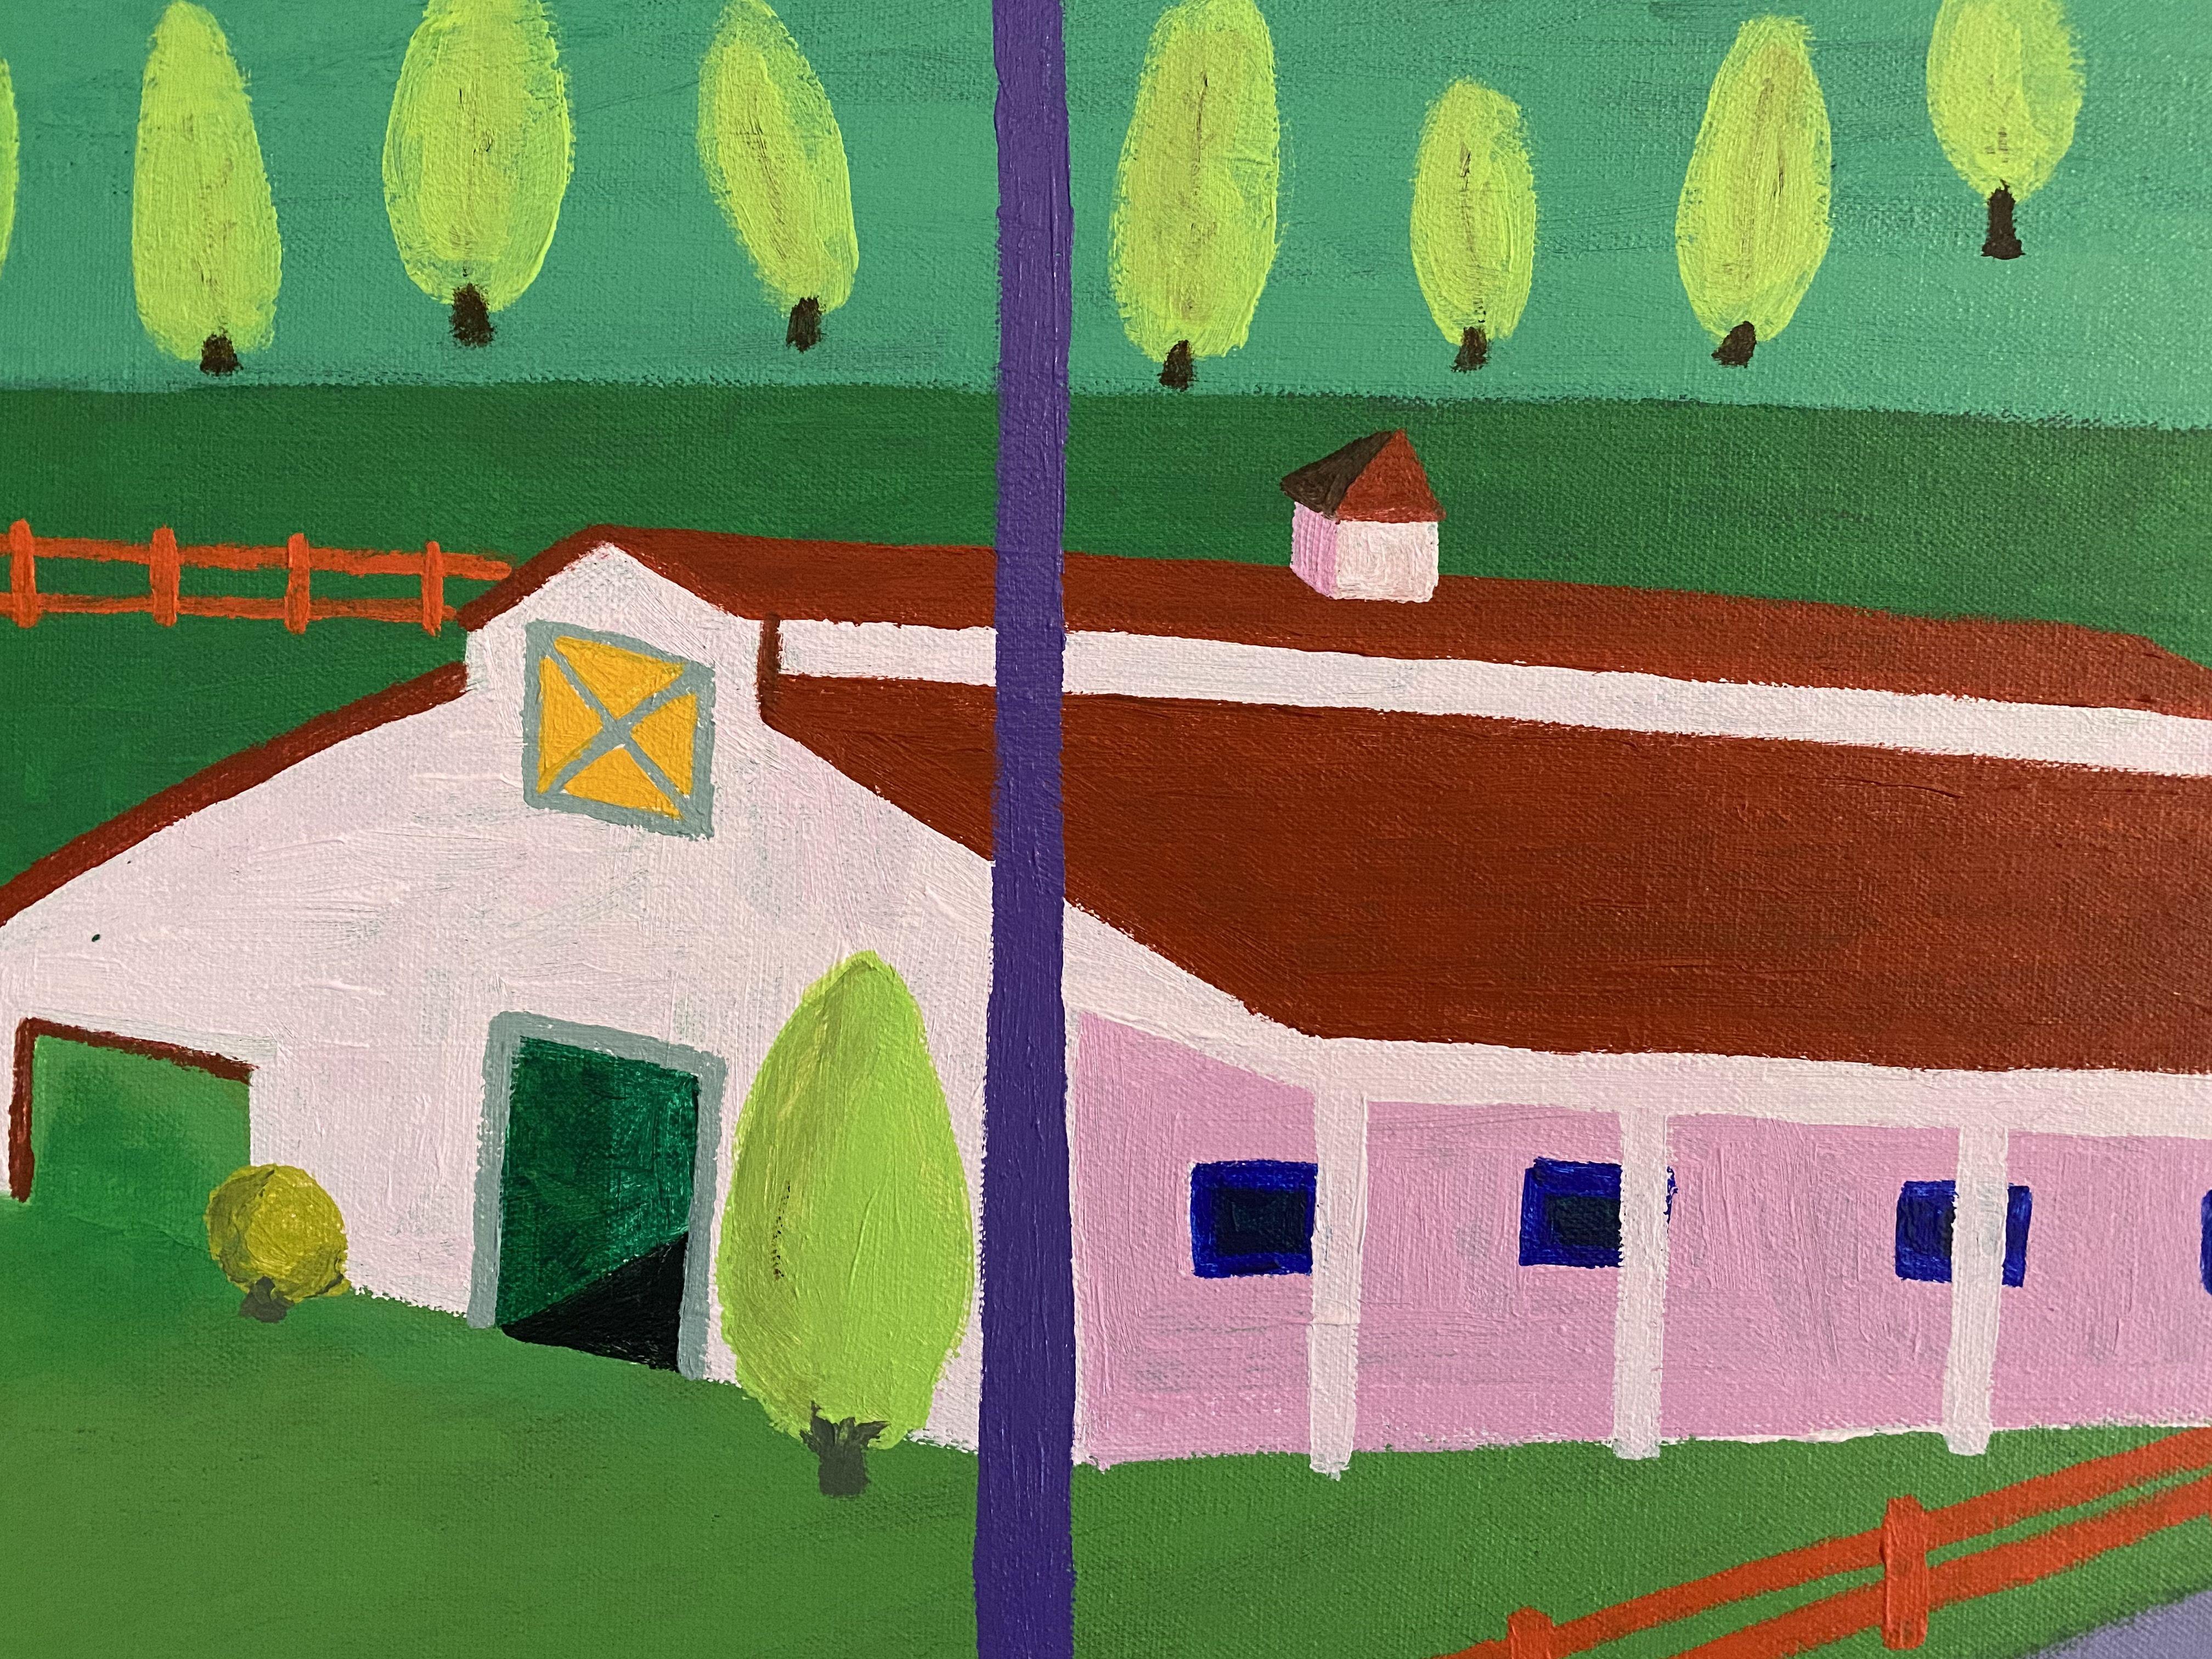 A trip to the mountains and rolling hills of northern Georgia inspired this Pop Art painting.  The houses and farm buildings nestled among the trees and green pastures make for a comforting space and that is what I created on the canvas.  The